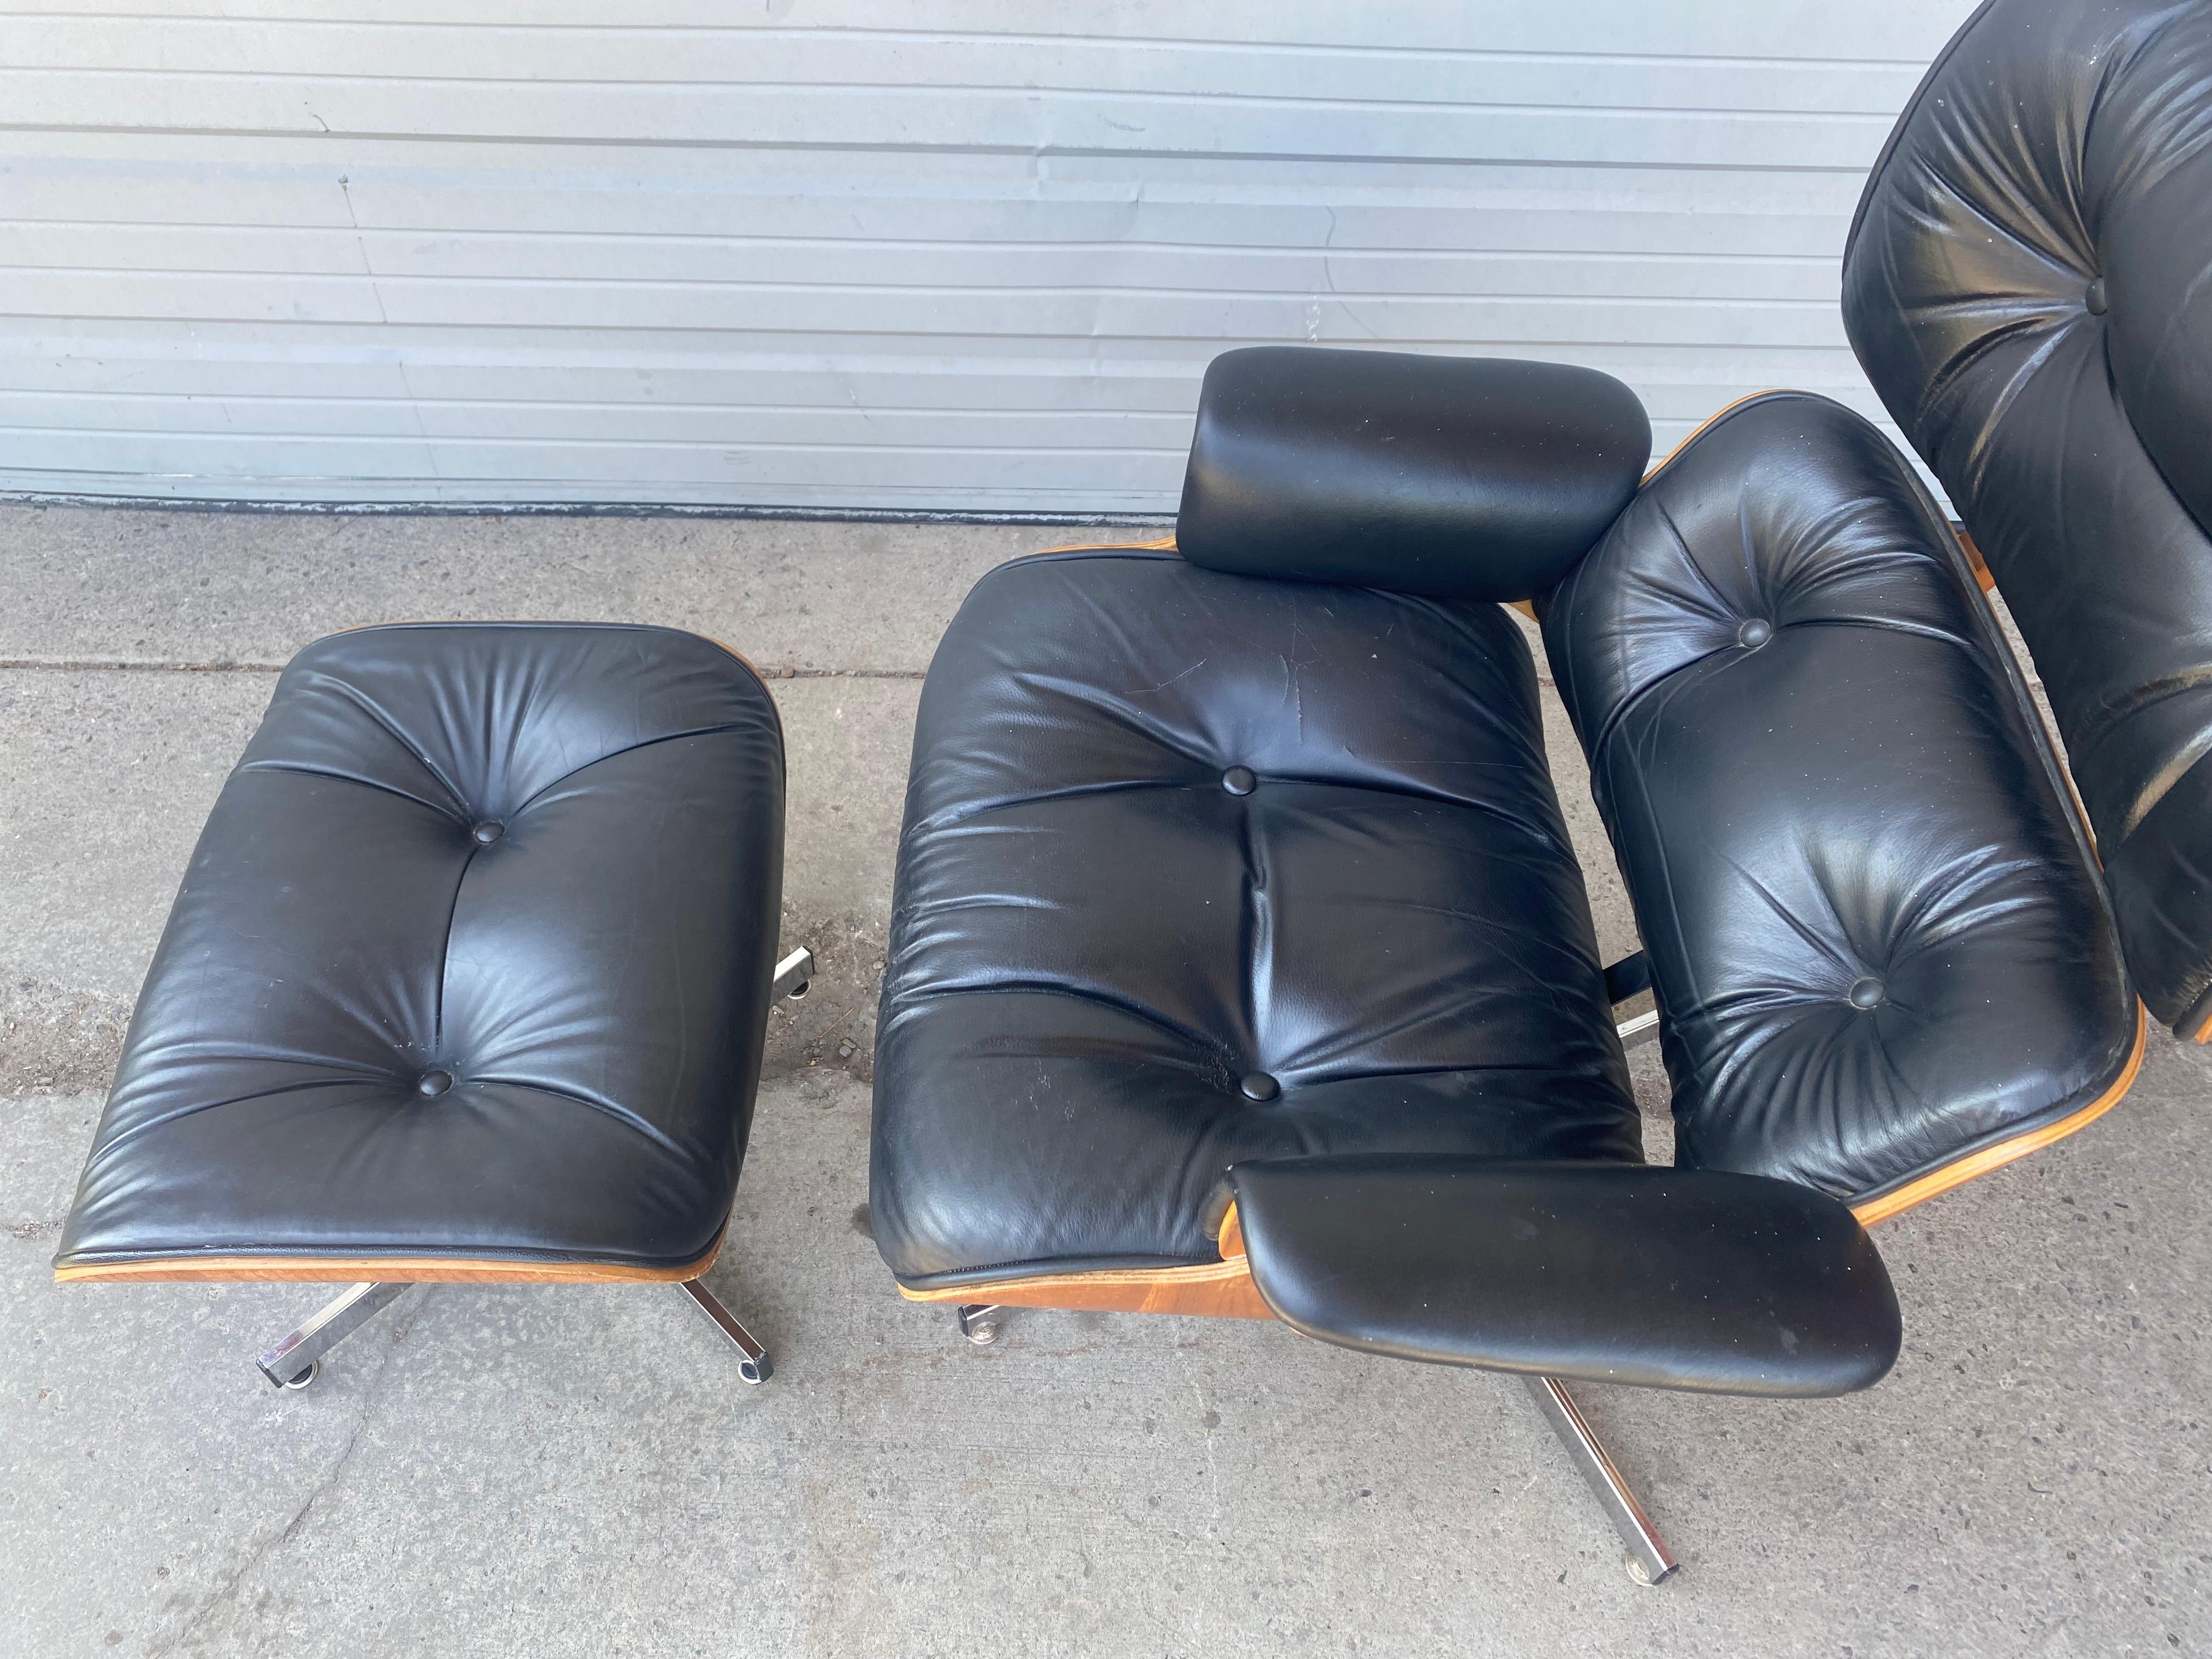 Late 20th Century Eames Style Lounge Chair and Ottoman, Leather, Plycraft, Classic Modernist